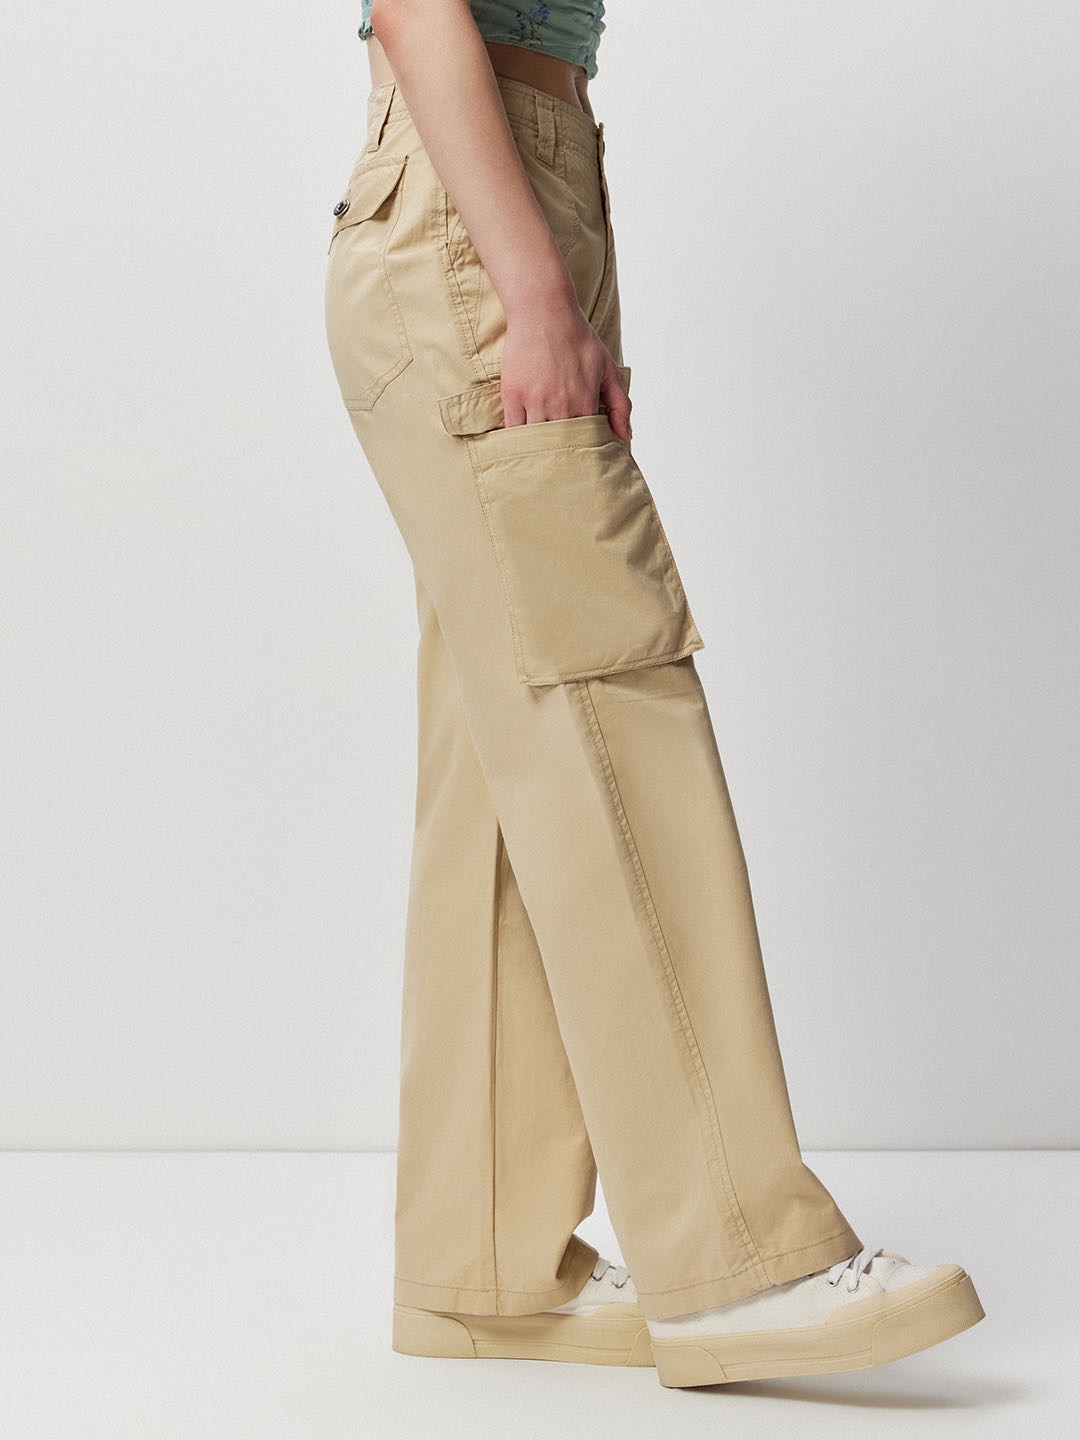 Buy Luxe Fred Formal Pants for Women Online in India  a la mode